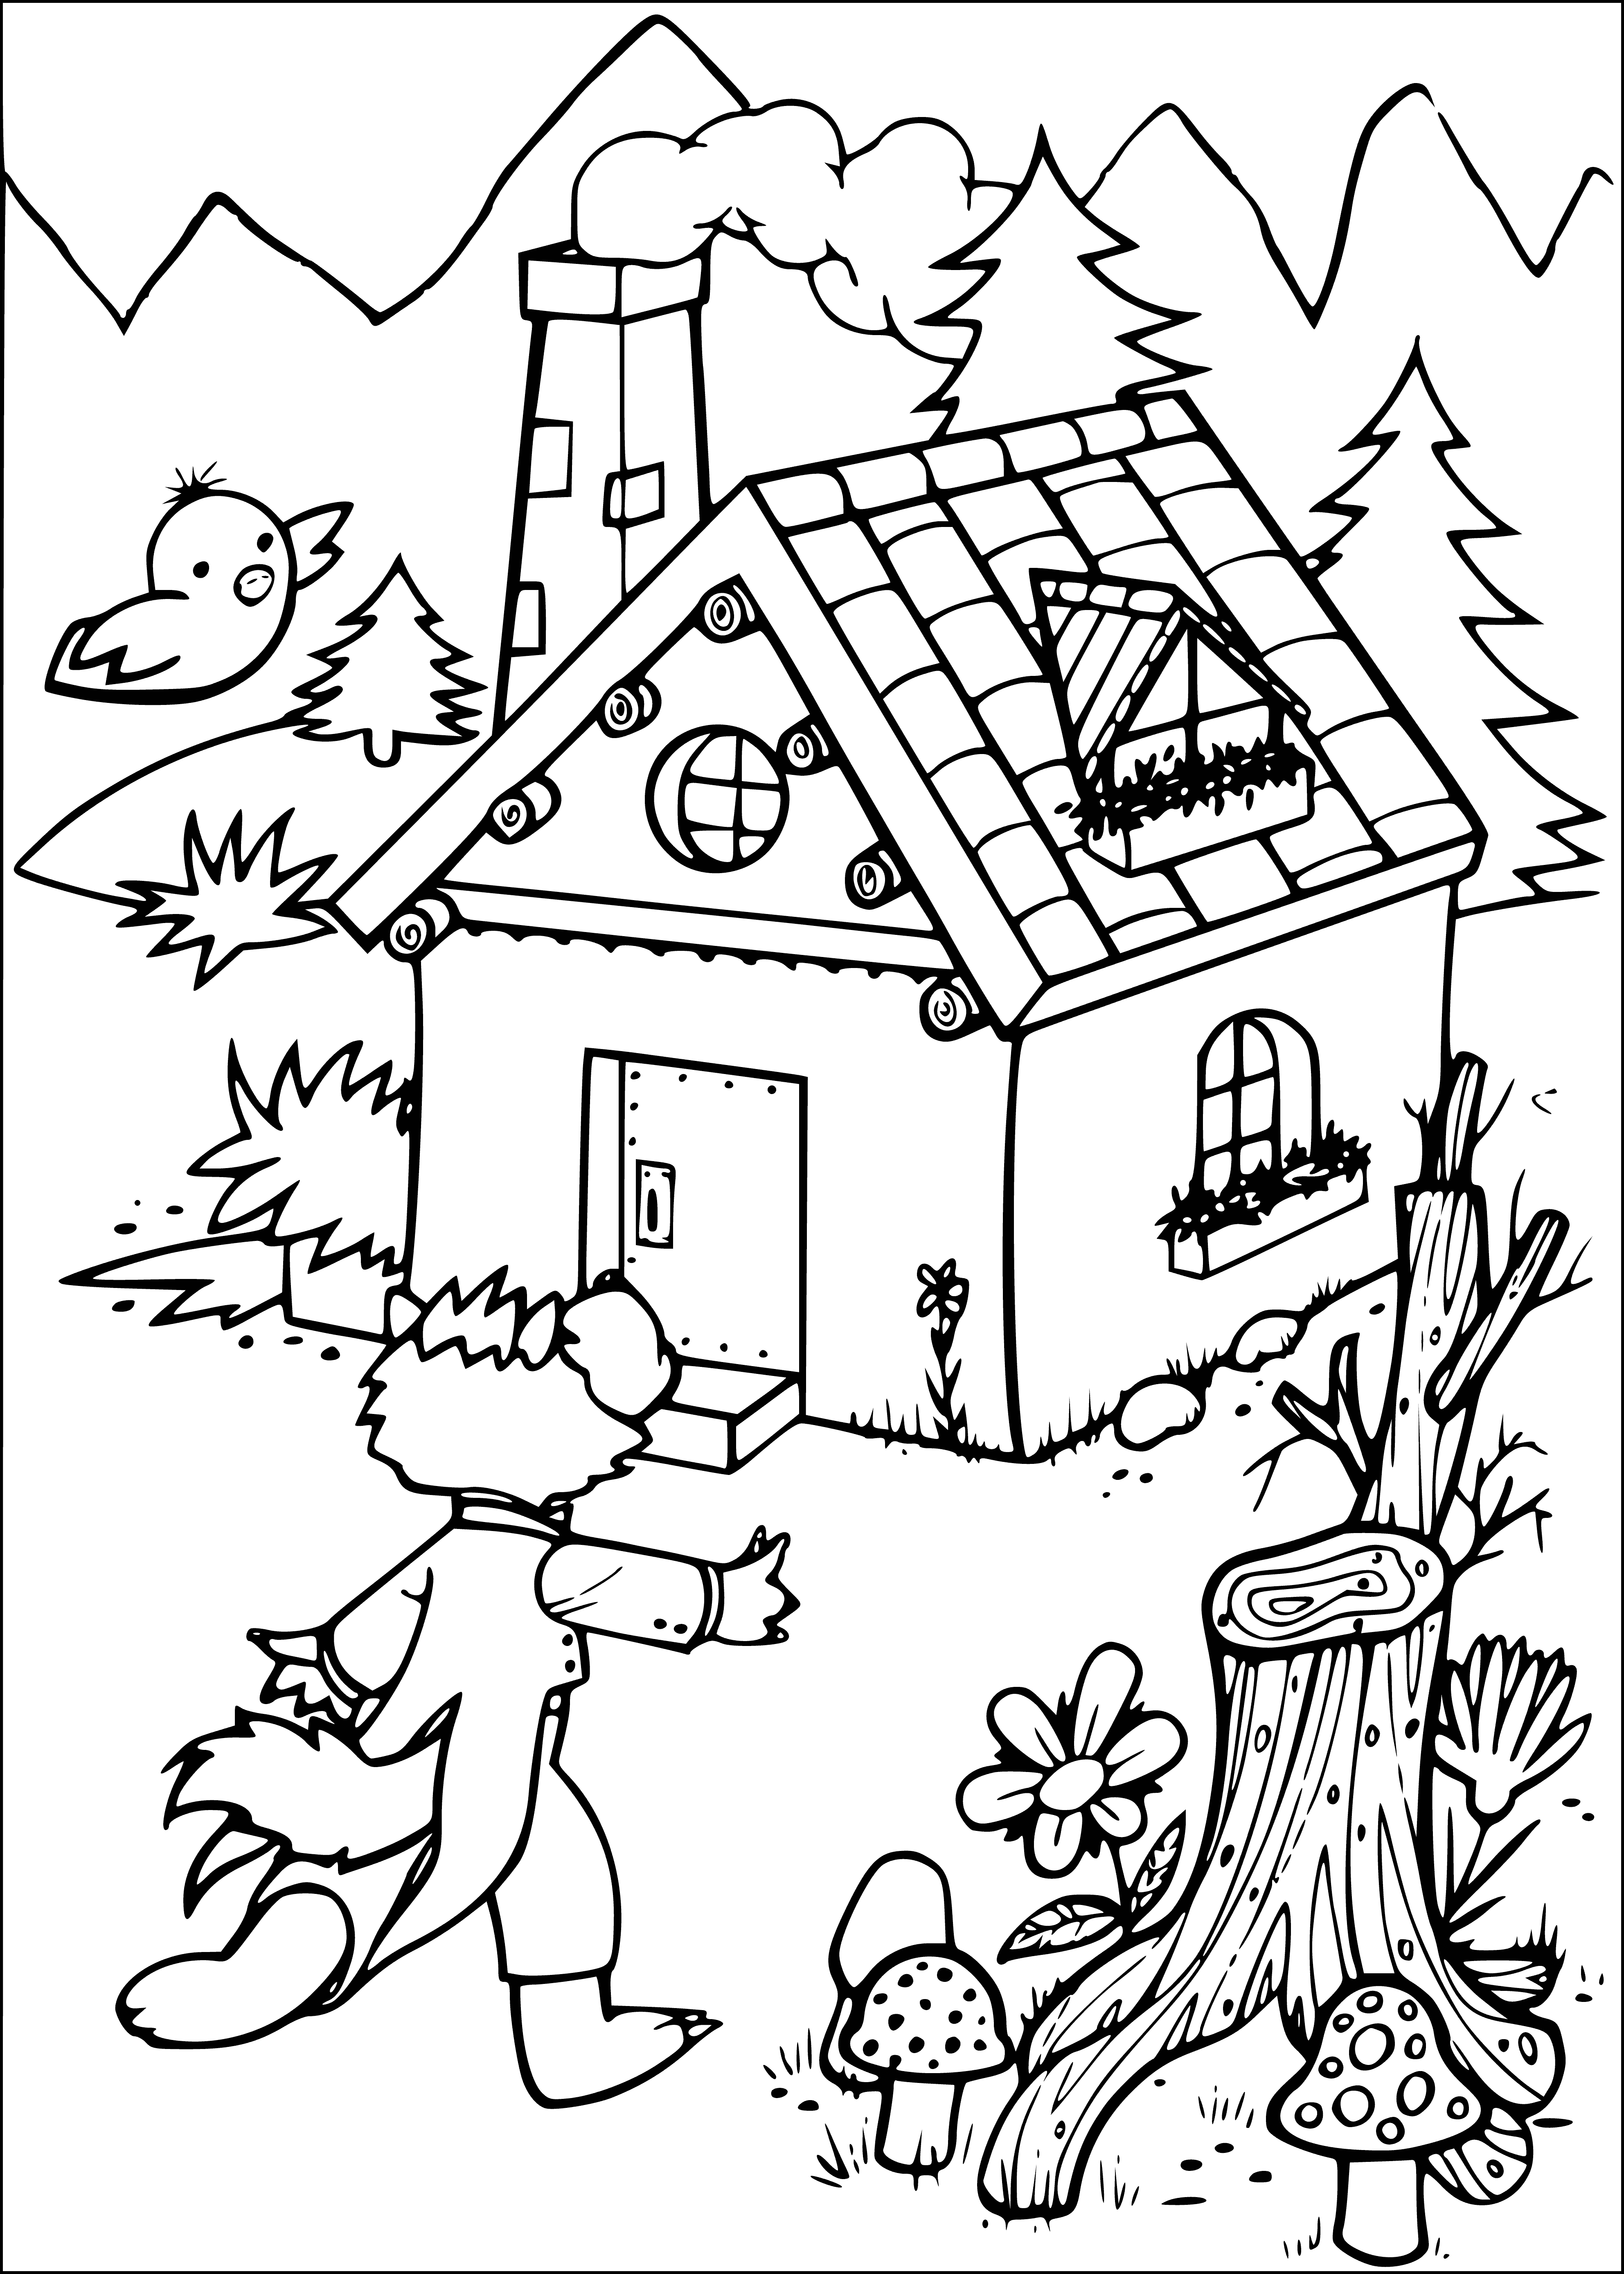 The wolf could not climb coloring page